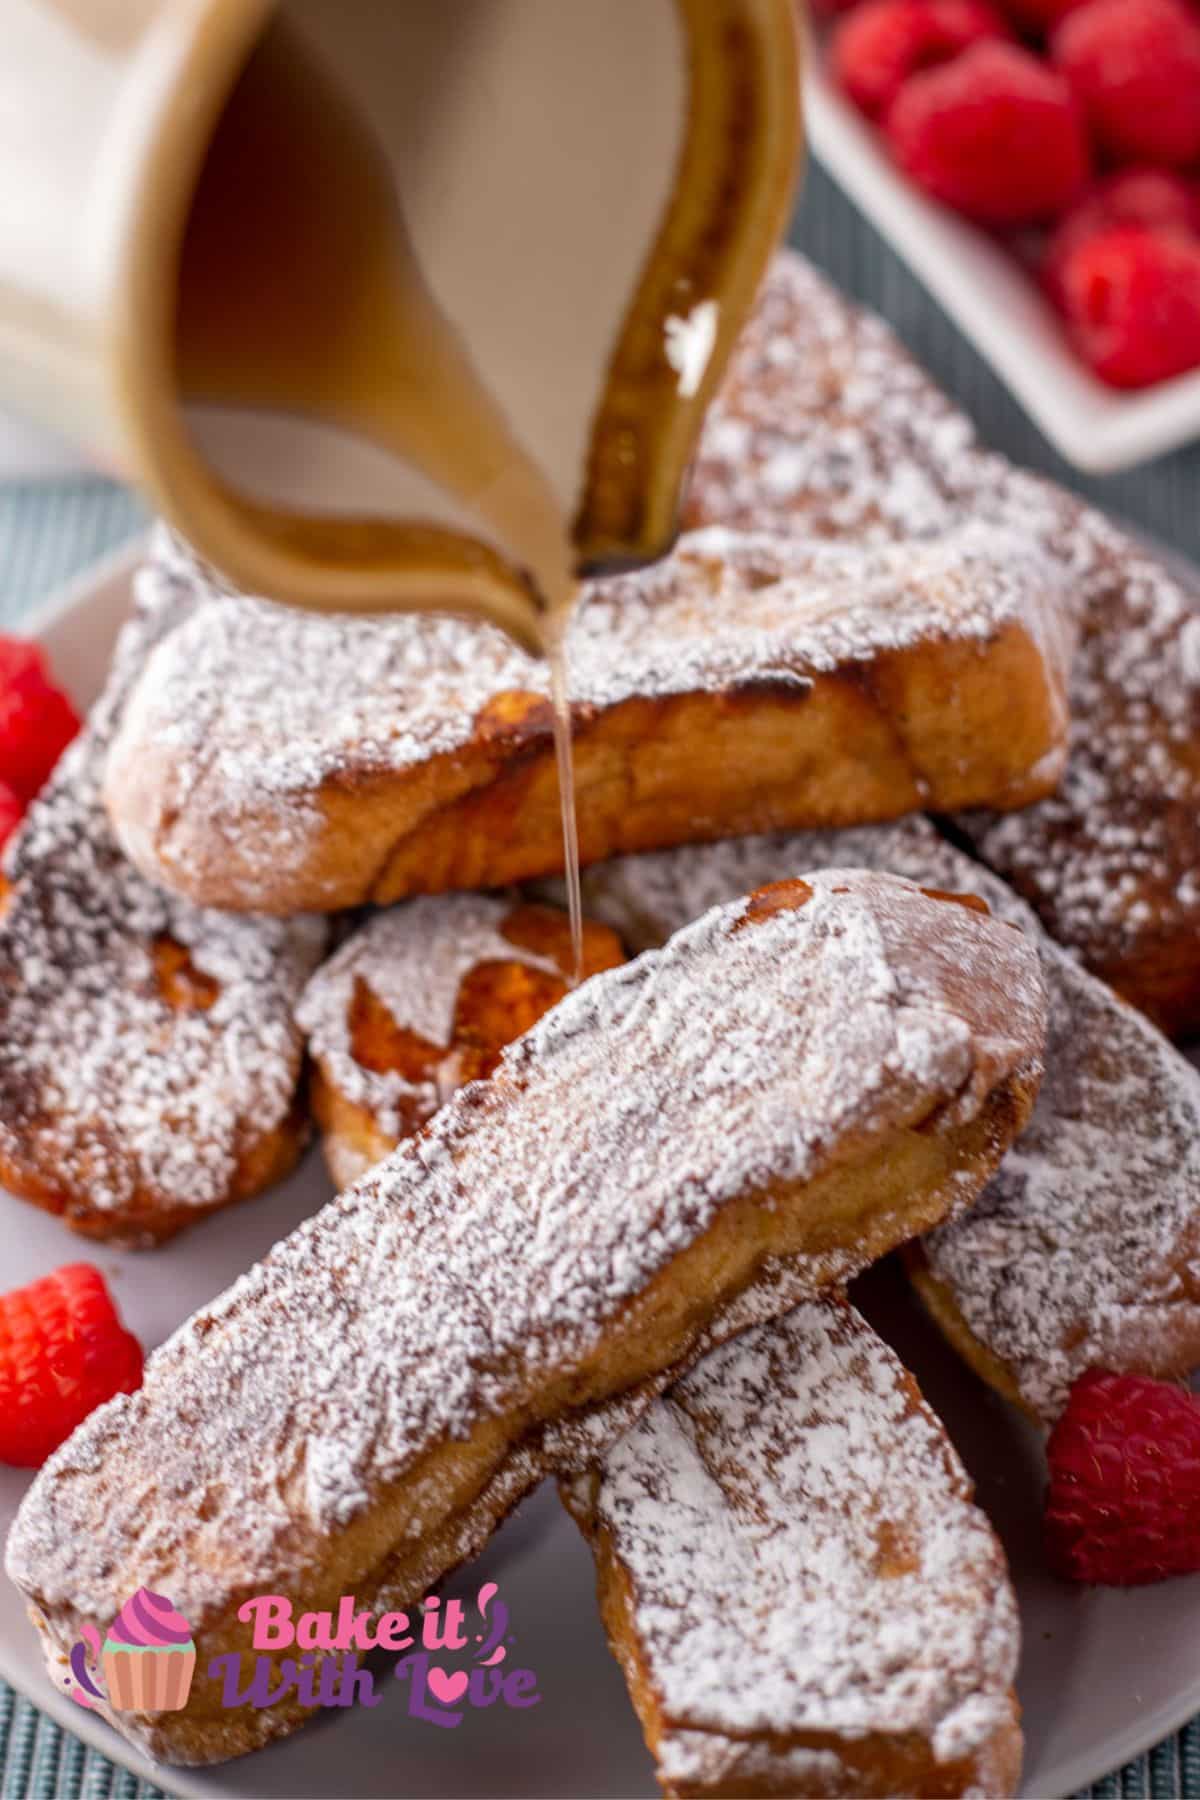 Tasty baked French toast sticks served on a plate dusted with confectioners sugar and maple syrup being poured over the stack.